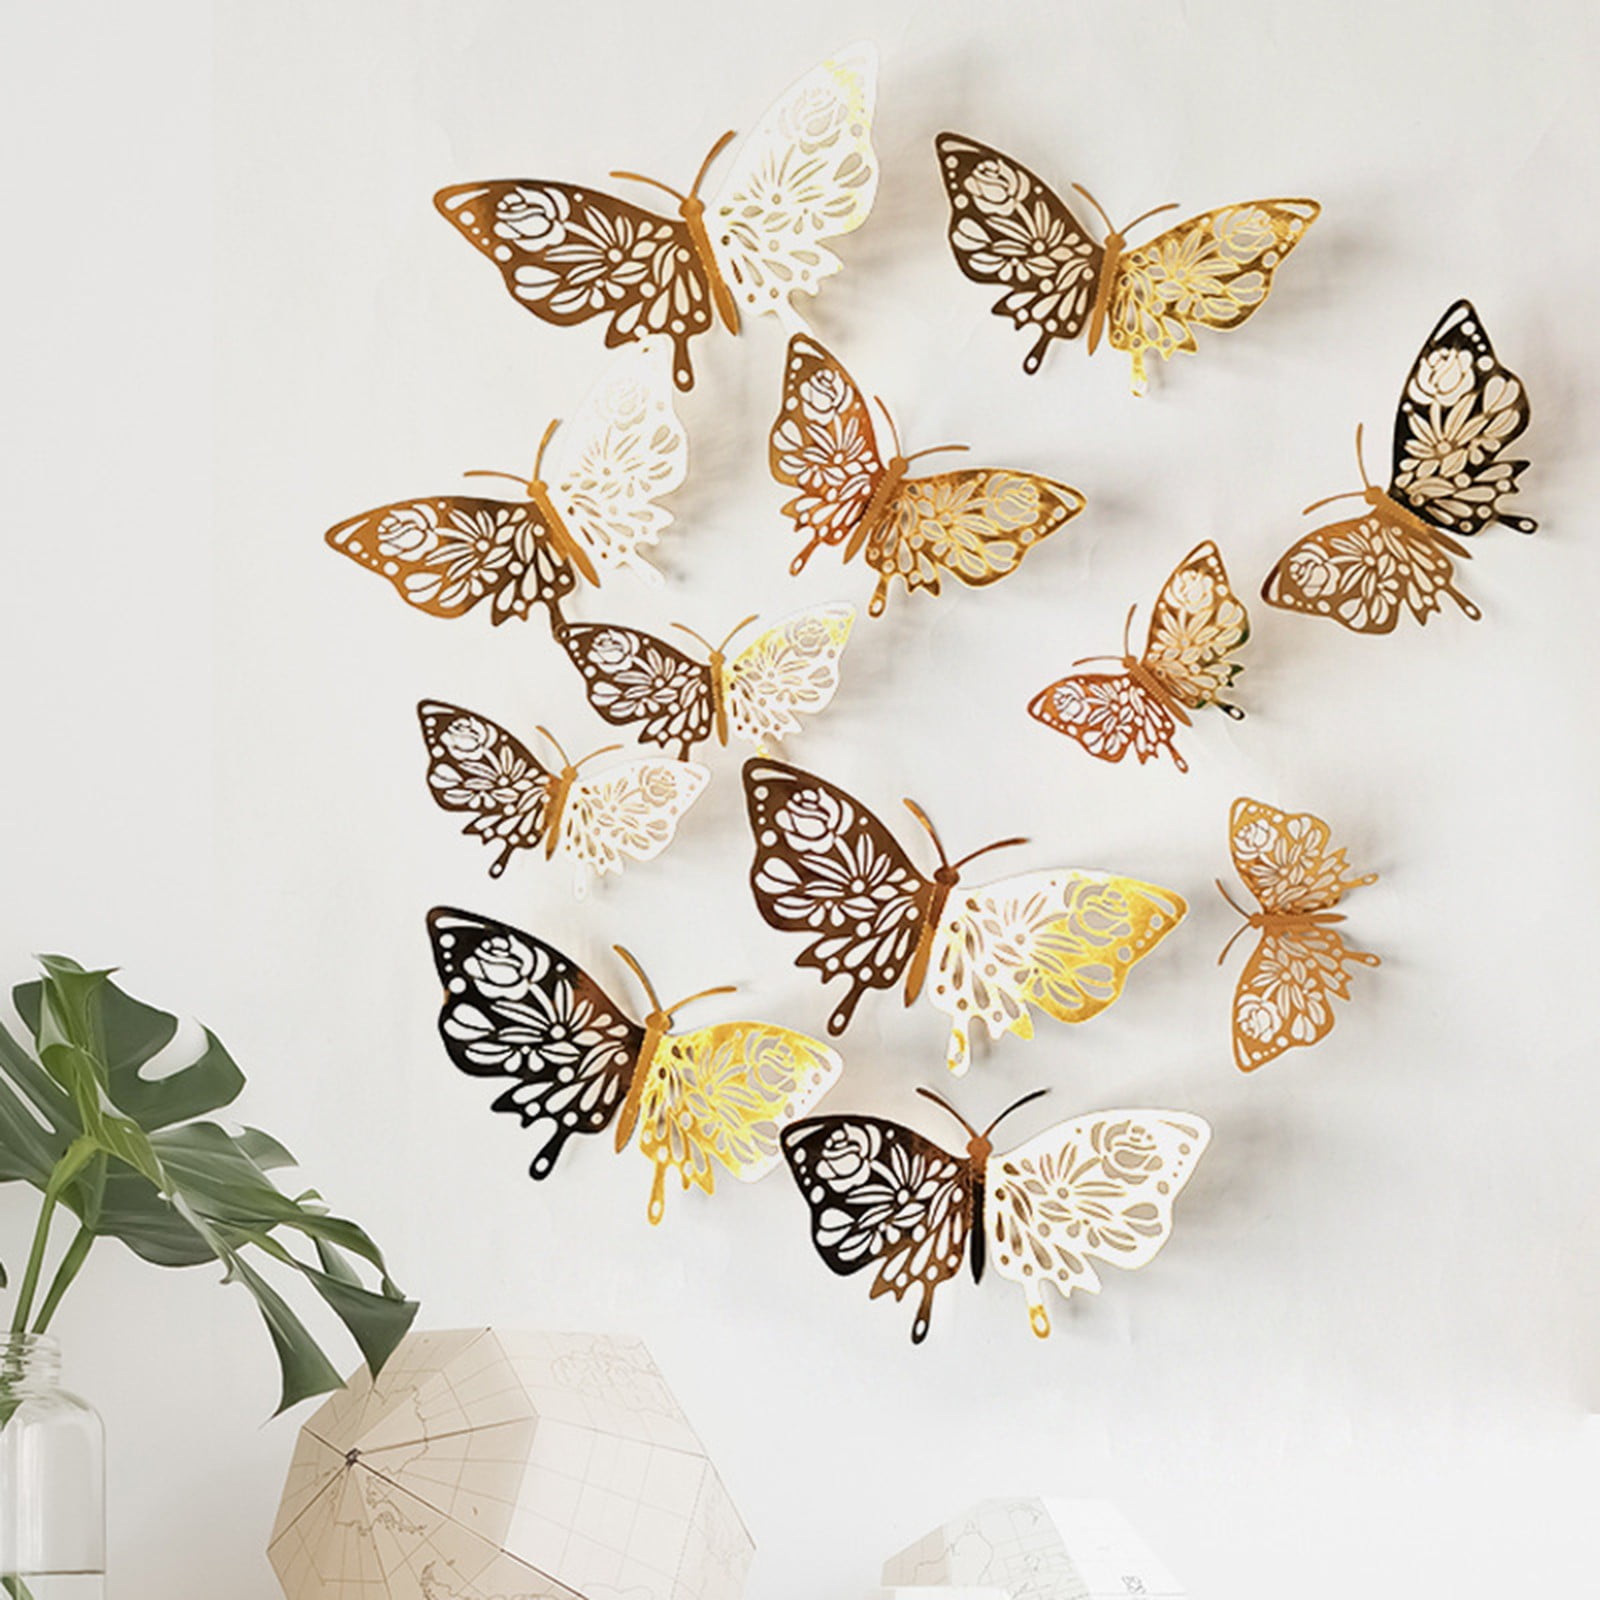 12pc Butterfly Wall Sticker Decal Room Home Decor Child Party Kids Bedroom Decor 